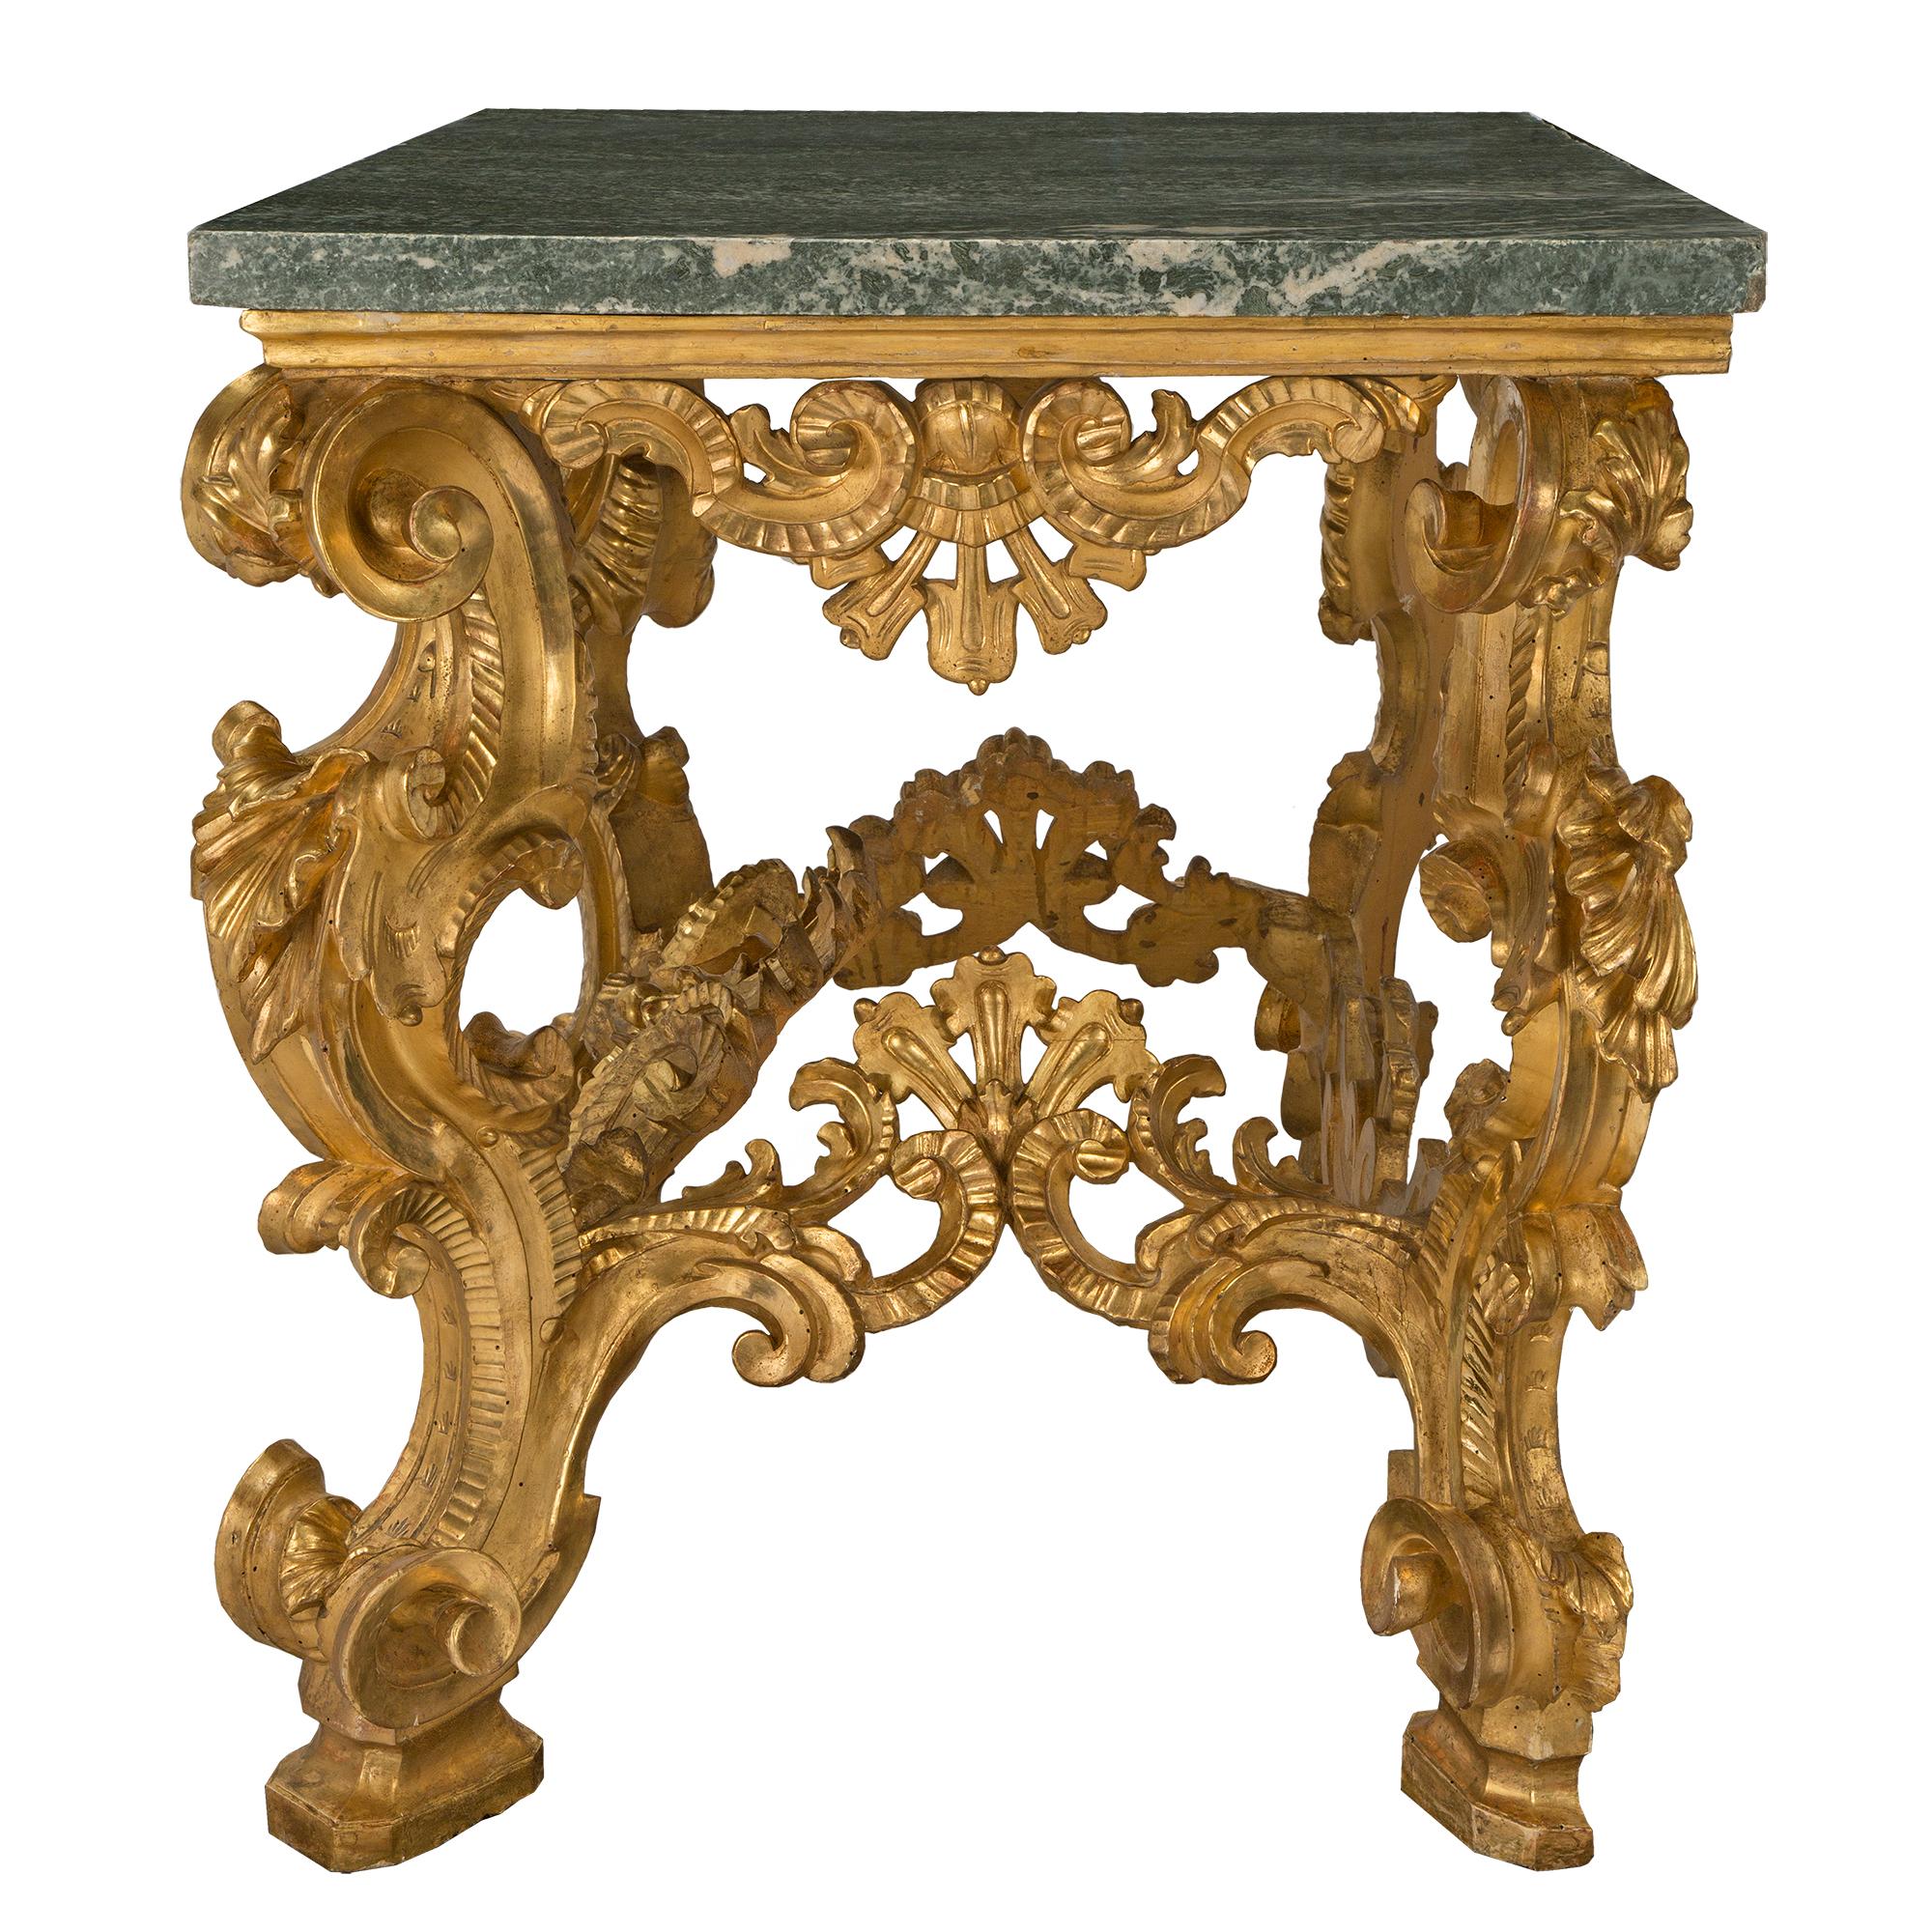 Italian Early 18th Century Louis XIV Period Freestanding Console For Sale 1